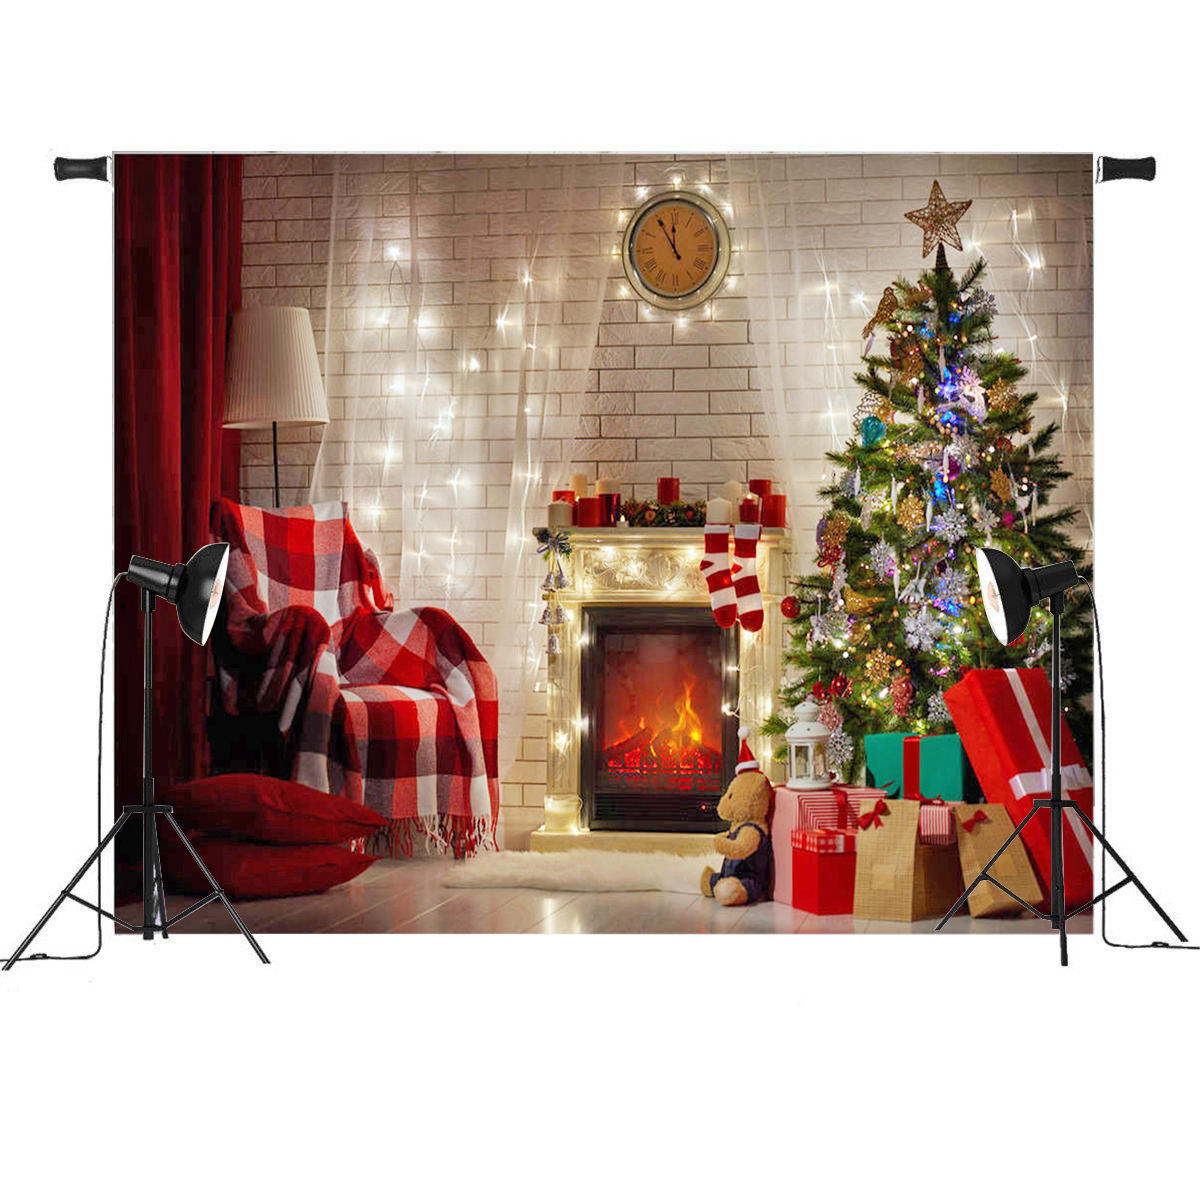 Kc Fireplace Best Of 7x5ft Red Christmas Tree Gift Chair Fireplace Graphy Backdrop Studio Prop Background